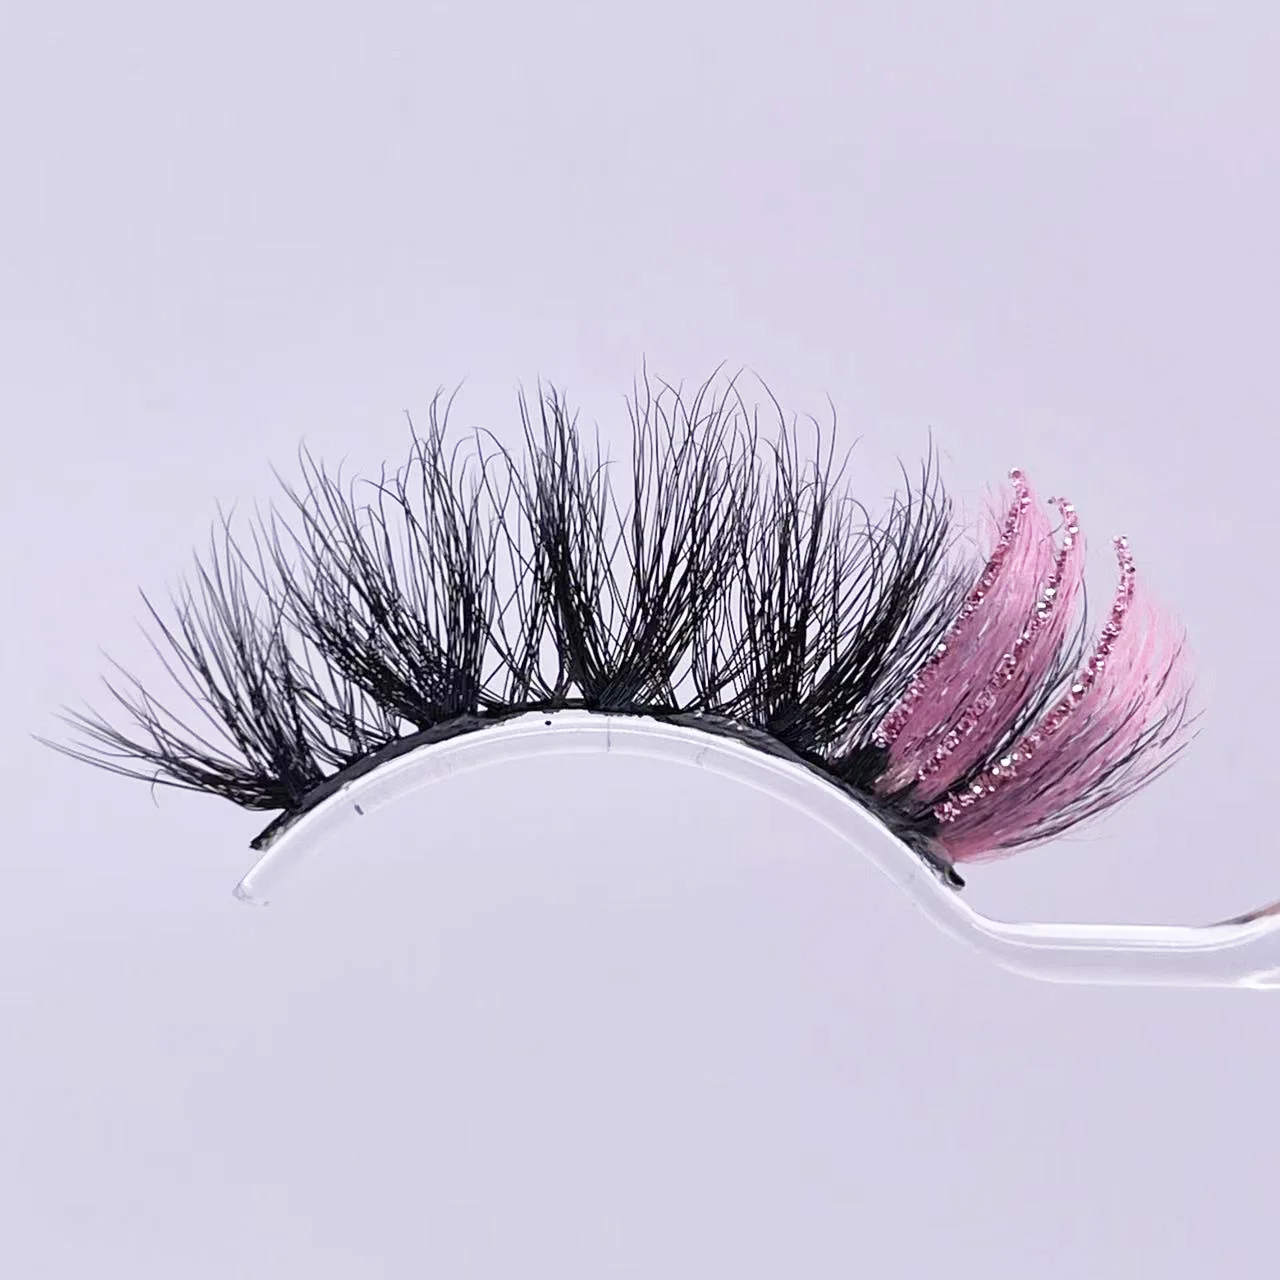 Hbzgtlad Colored Lashes Glitter Mink 15mm -20mm Fluffy Color Streaks Cosplay Makeup Beauty Eyelashes -Outlet Maid Outfit Store S59886433e86f49aebb61a729b3264ef9H.jpg